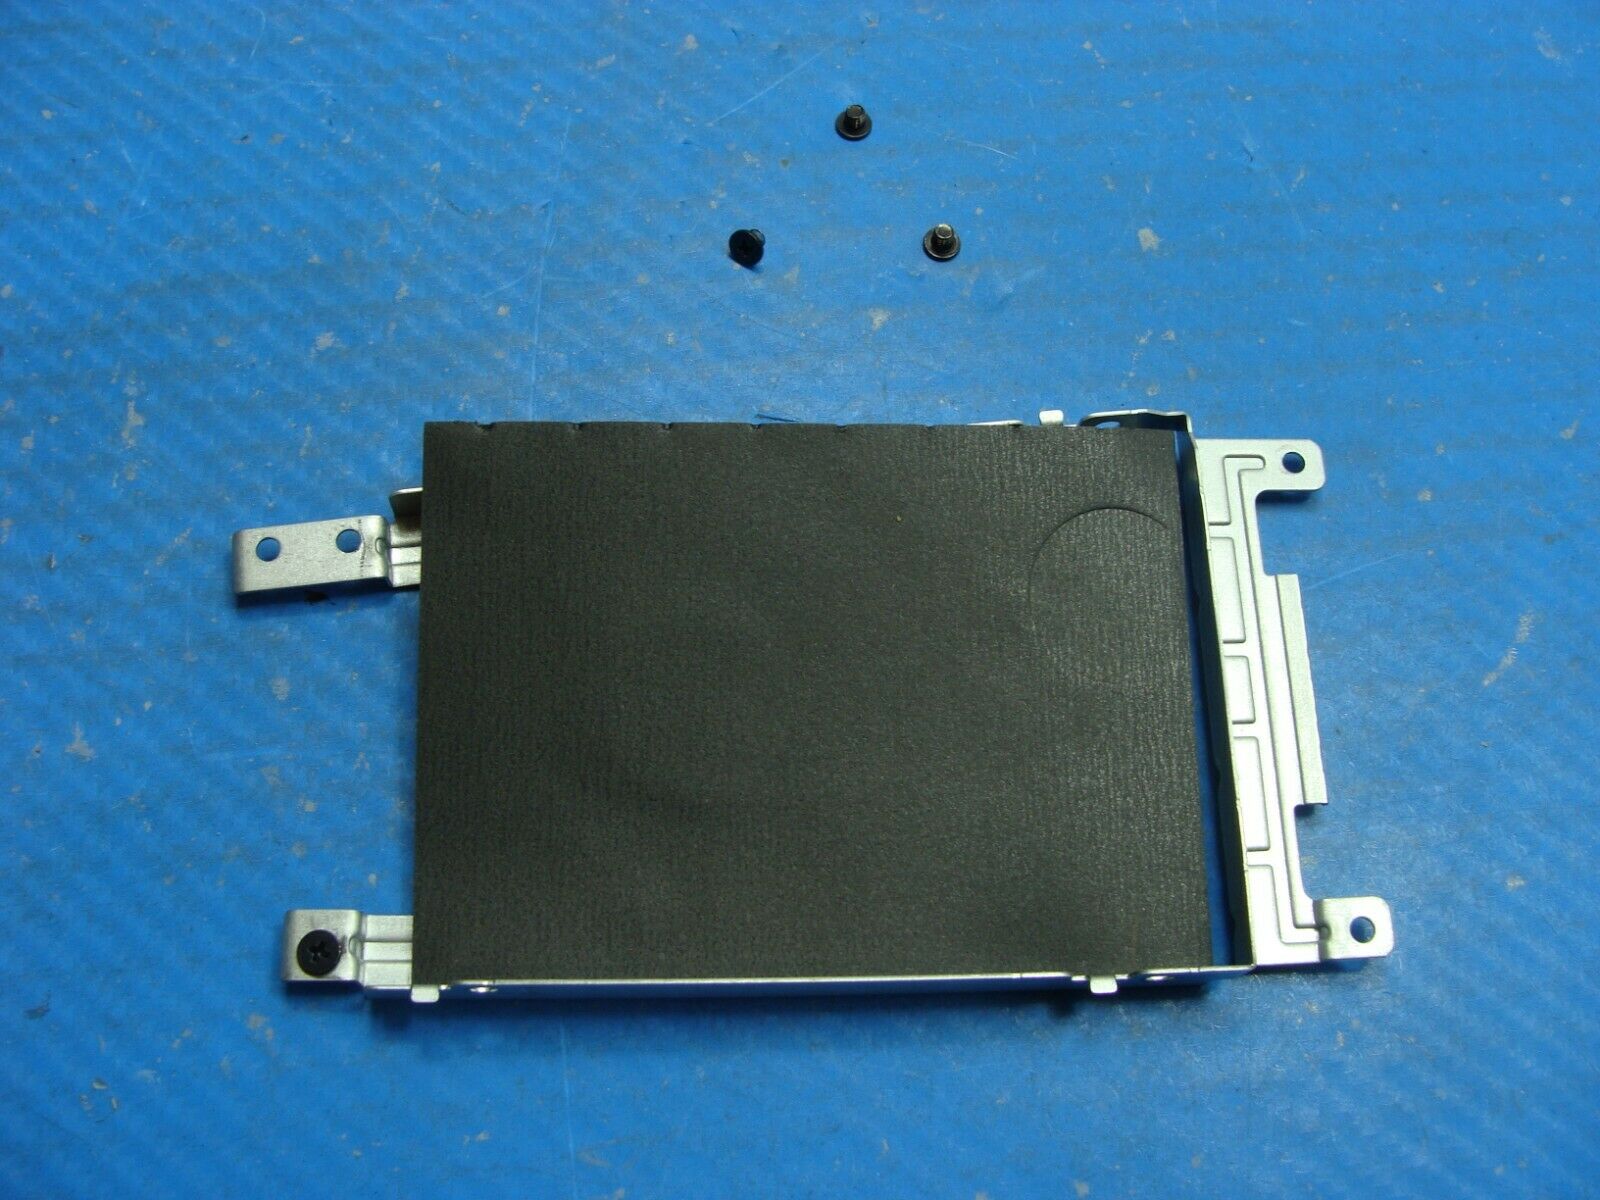 Asus 15.6 R541NA-RS01 OEM Laptop HDD Hard Drive Caddy w/ Screws - Laptop Parts - Buy Authentic Computer Parts - Top Seller Ebay